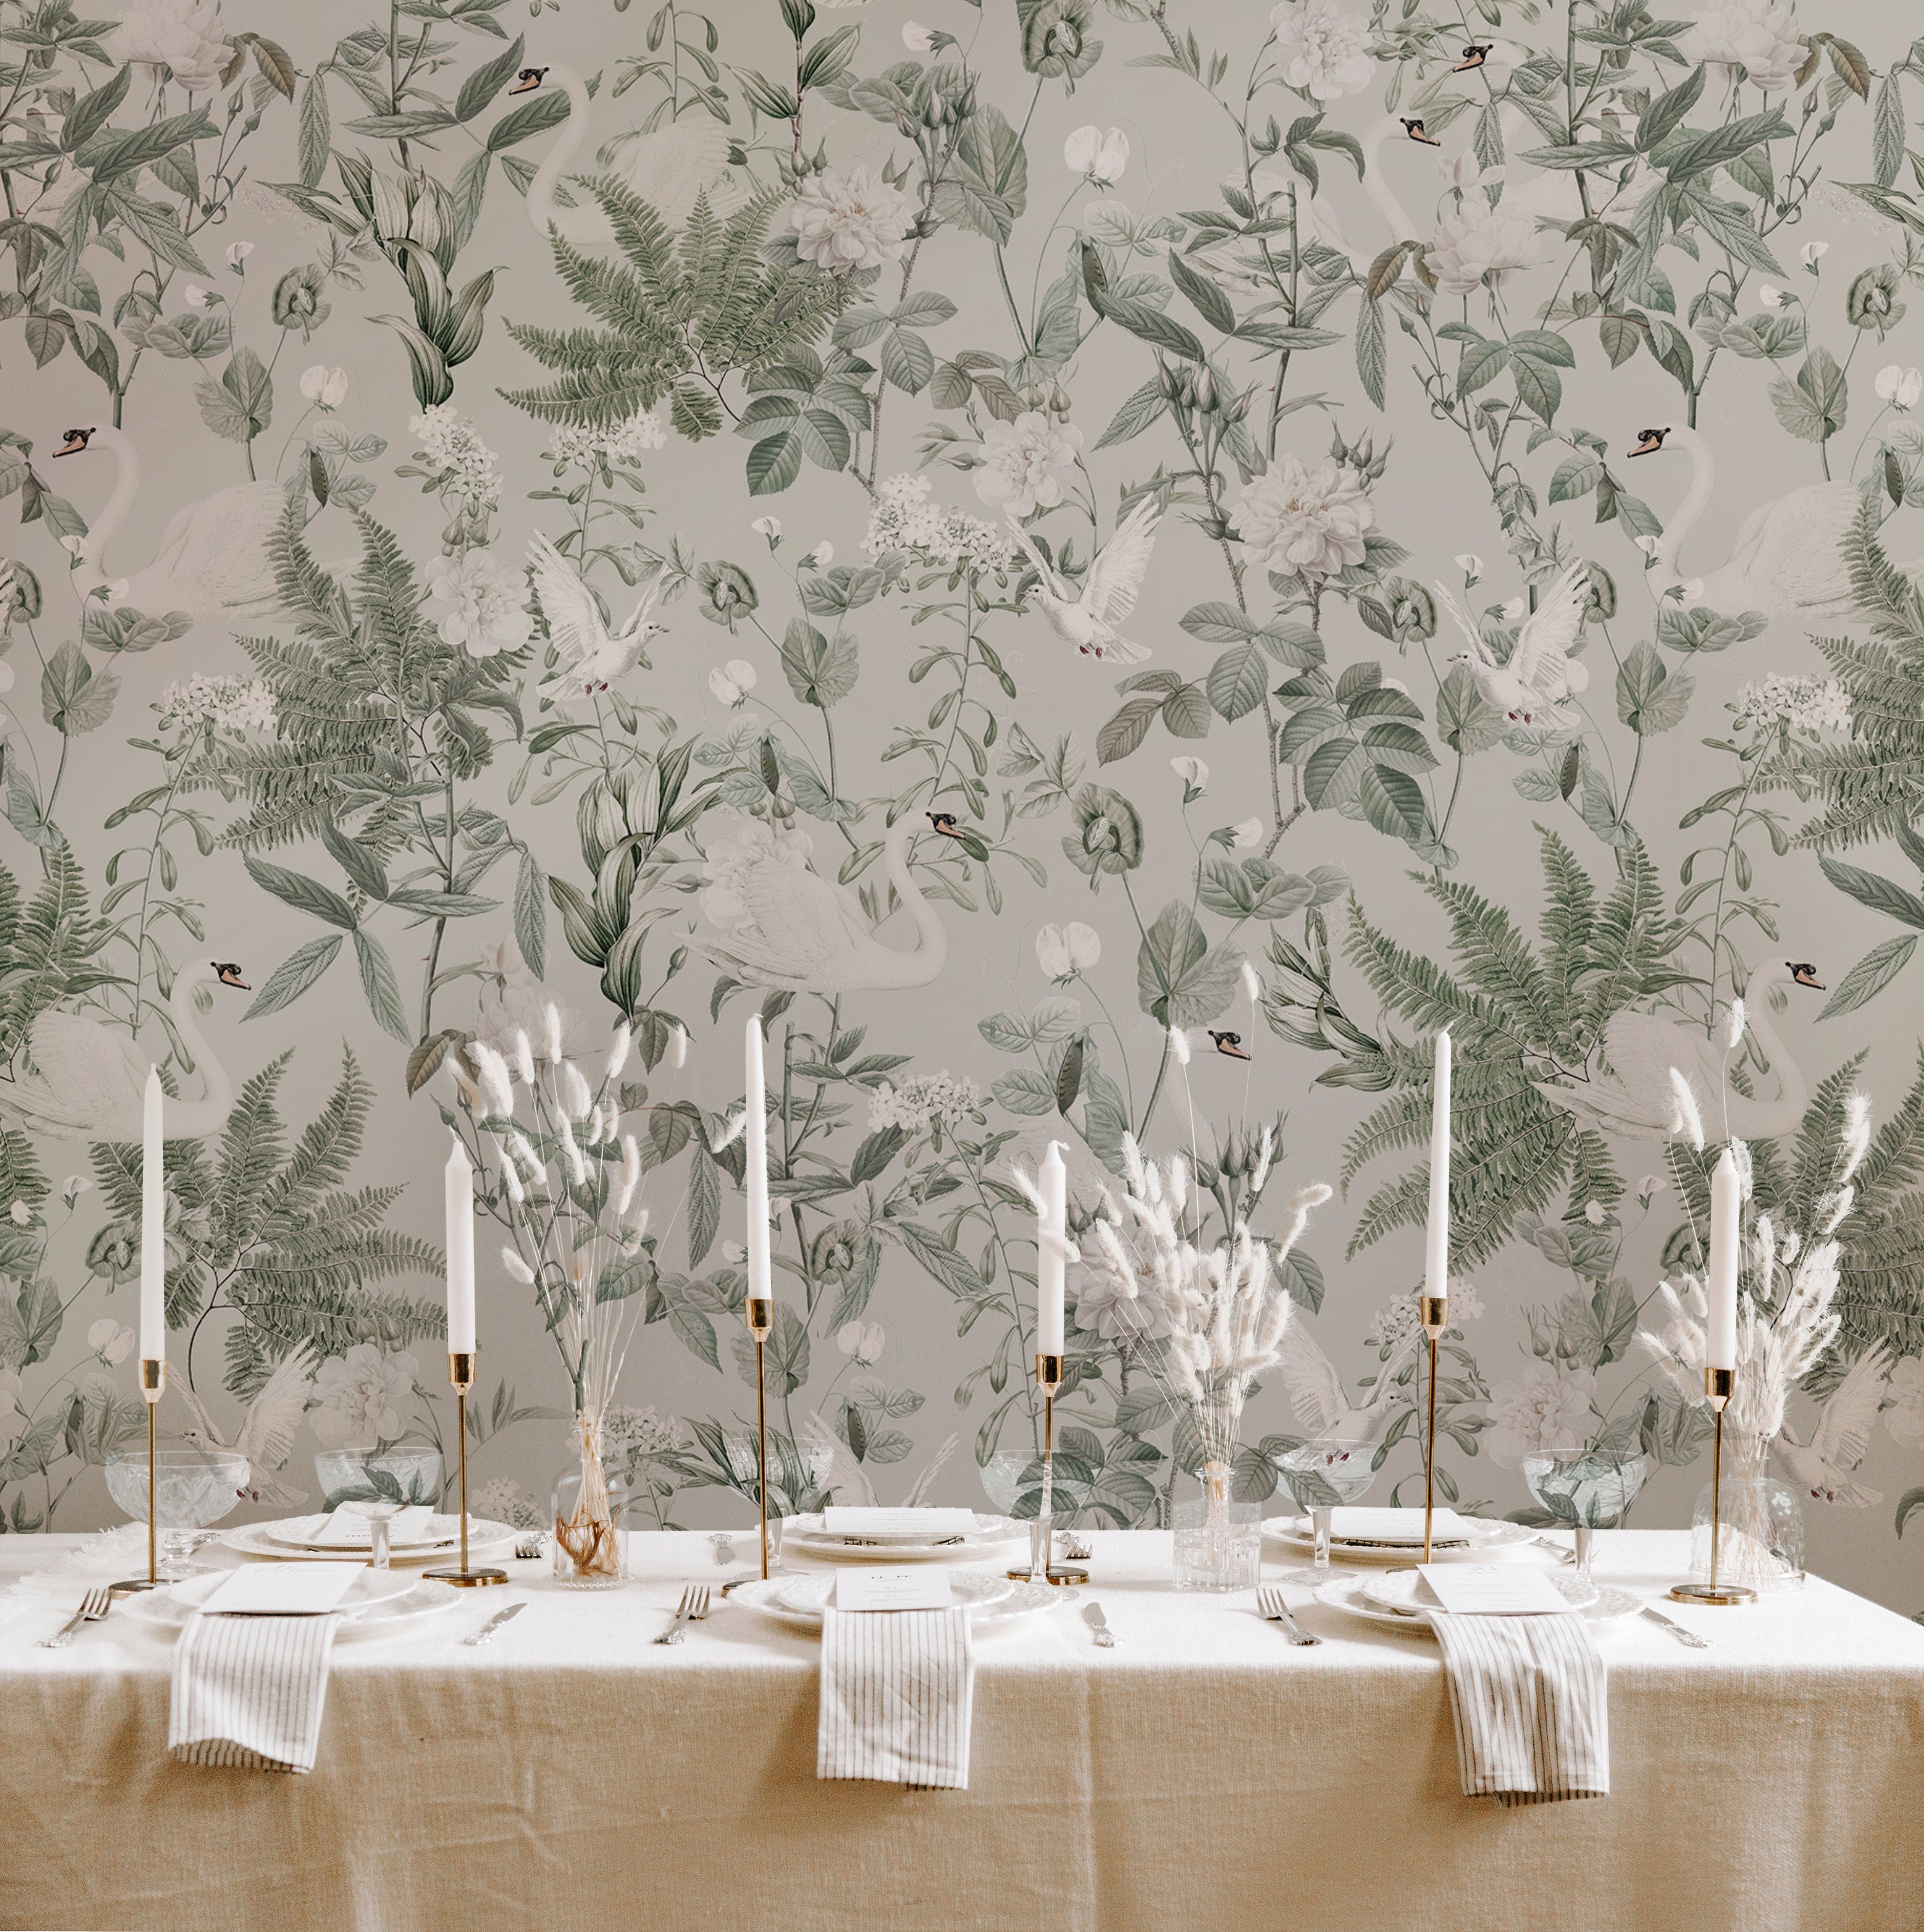 A sophisticated dining room wall covered with Sage Bird Wallpaper, presenting a tranquil nature scene with elegant swans and diverse flora in muted green and white tones, enhancing the room's classic decor.